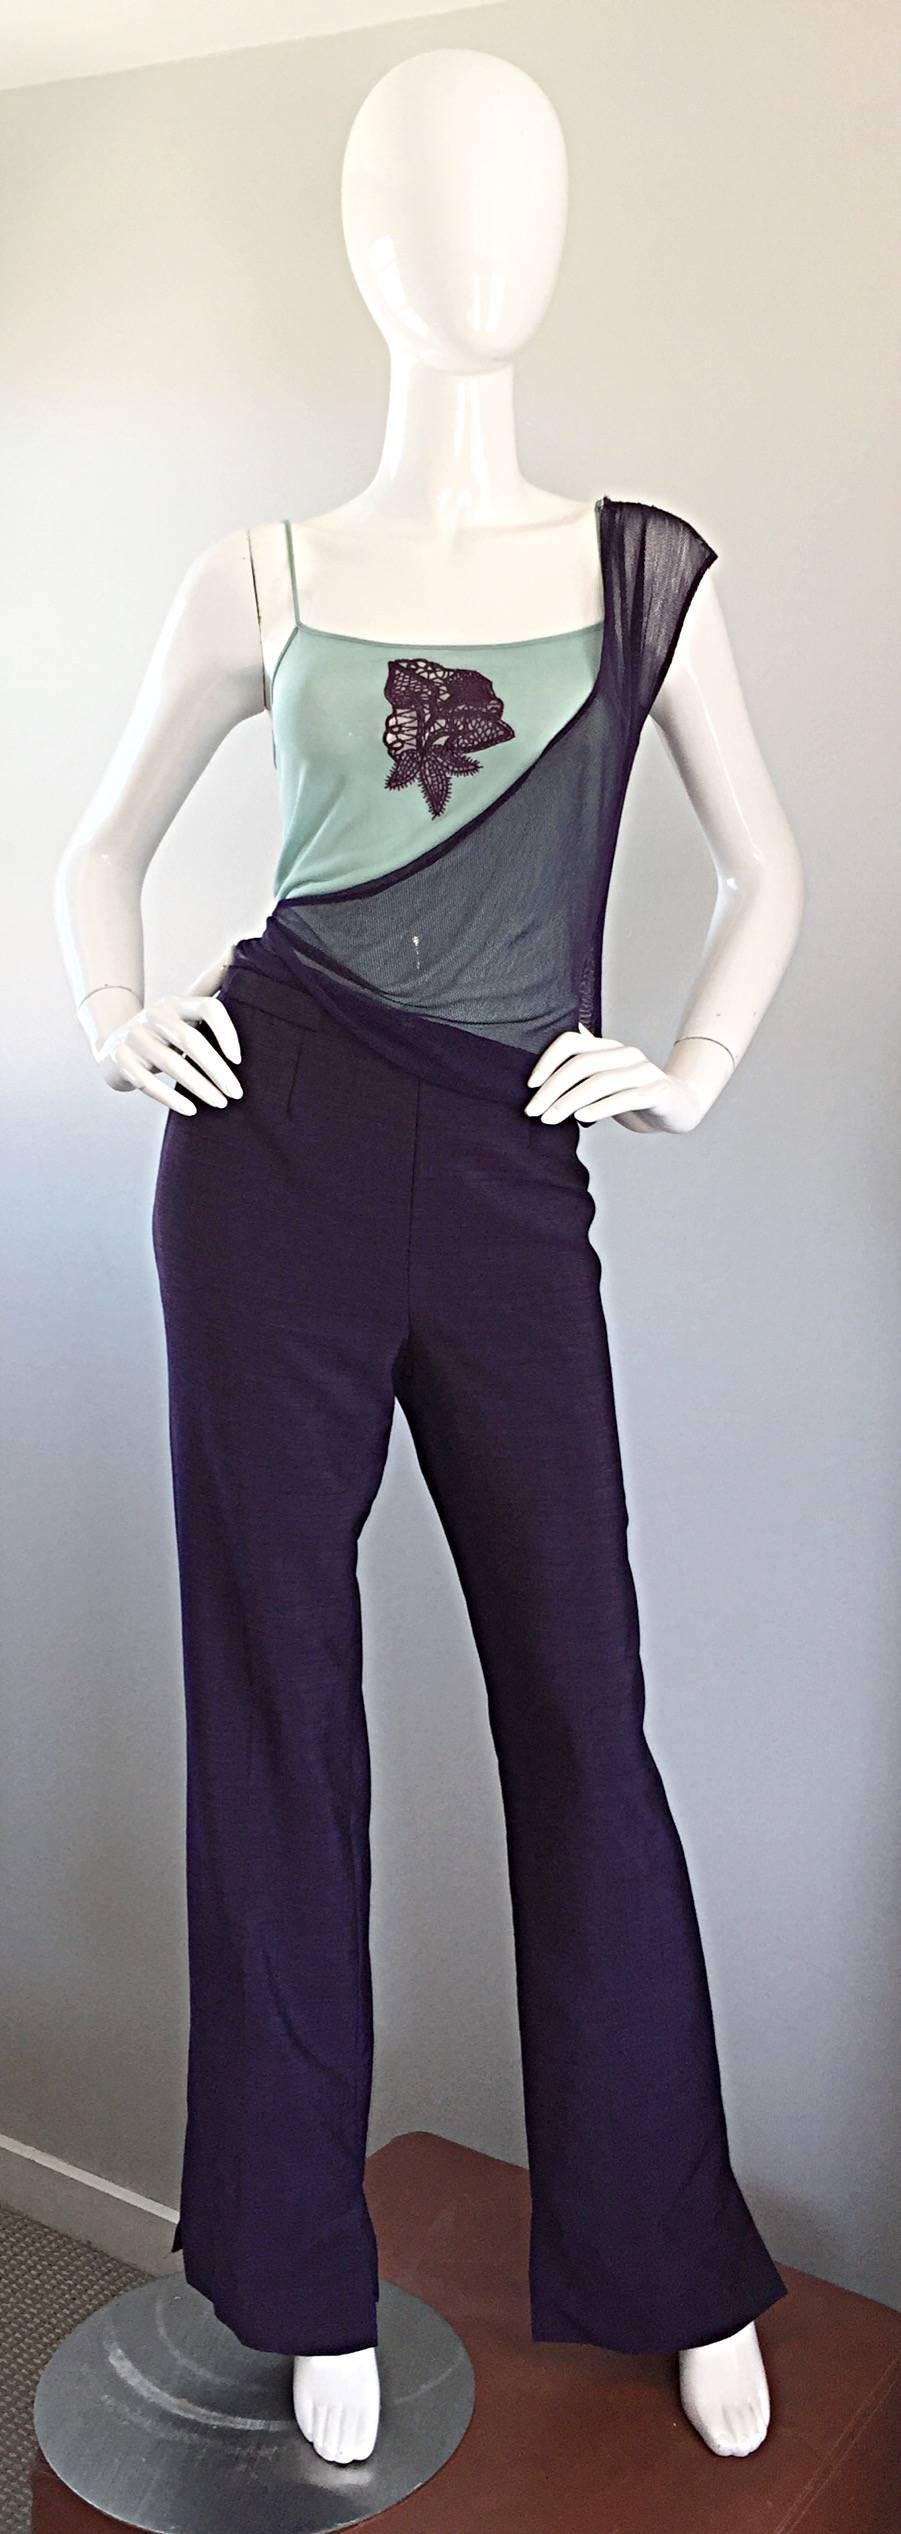 Chic vintage 1980s KENZO top from his RARE JUNGLE line! Light blue silk cami with an attached purple / eggplant mesh overlay that covers one side of the bodice. Matching purple lace crochet detail at center bust. Super flattering stretch to fit